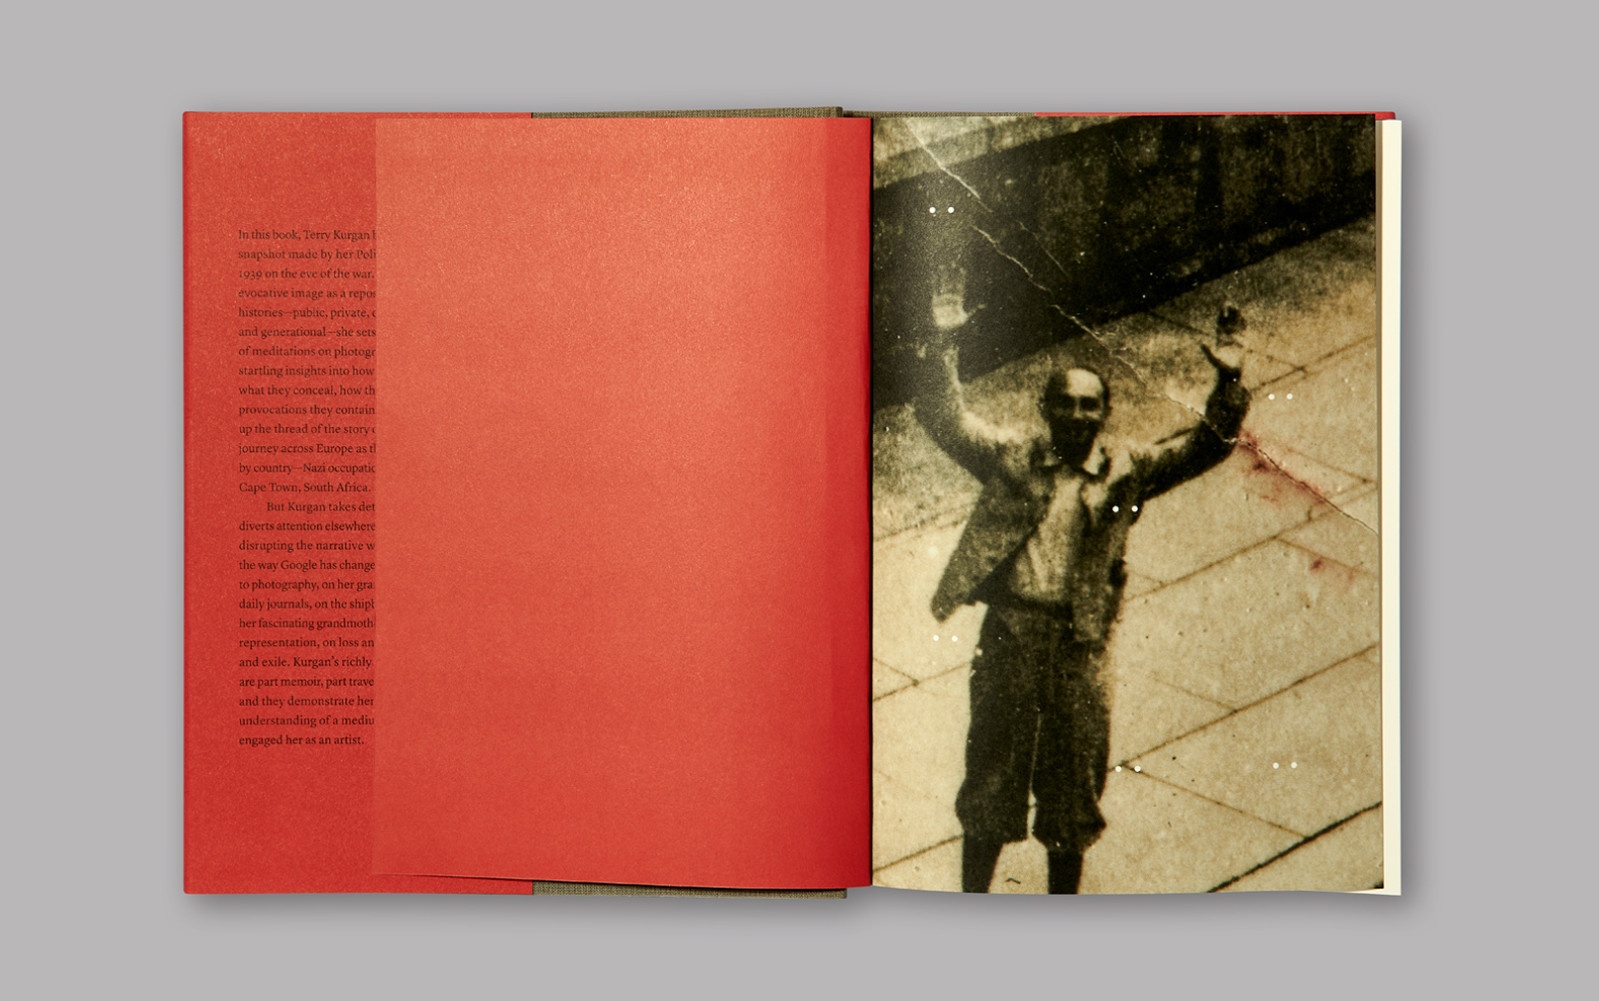 A topdown photograph of Terry Kurgan’s book ‘Everyone is Present: Essays on Photography, Memory and Family’ from the book launch on A4’s top floor. On the left, an empty red page. On the right, a full page photographic detail of a man with raised hands standing on a stone surface.
